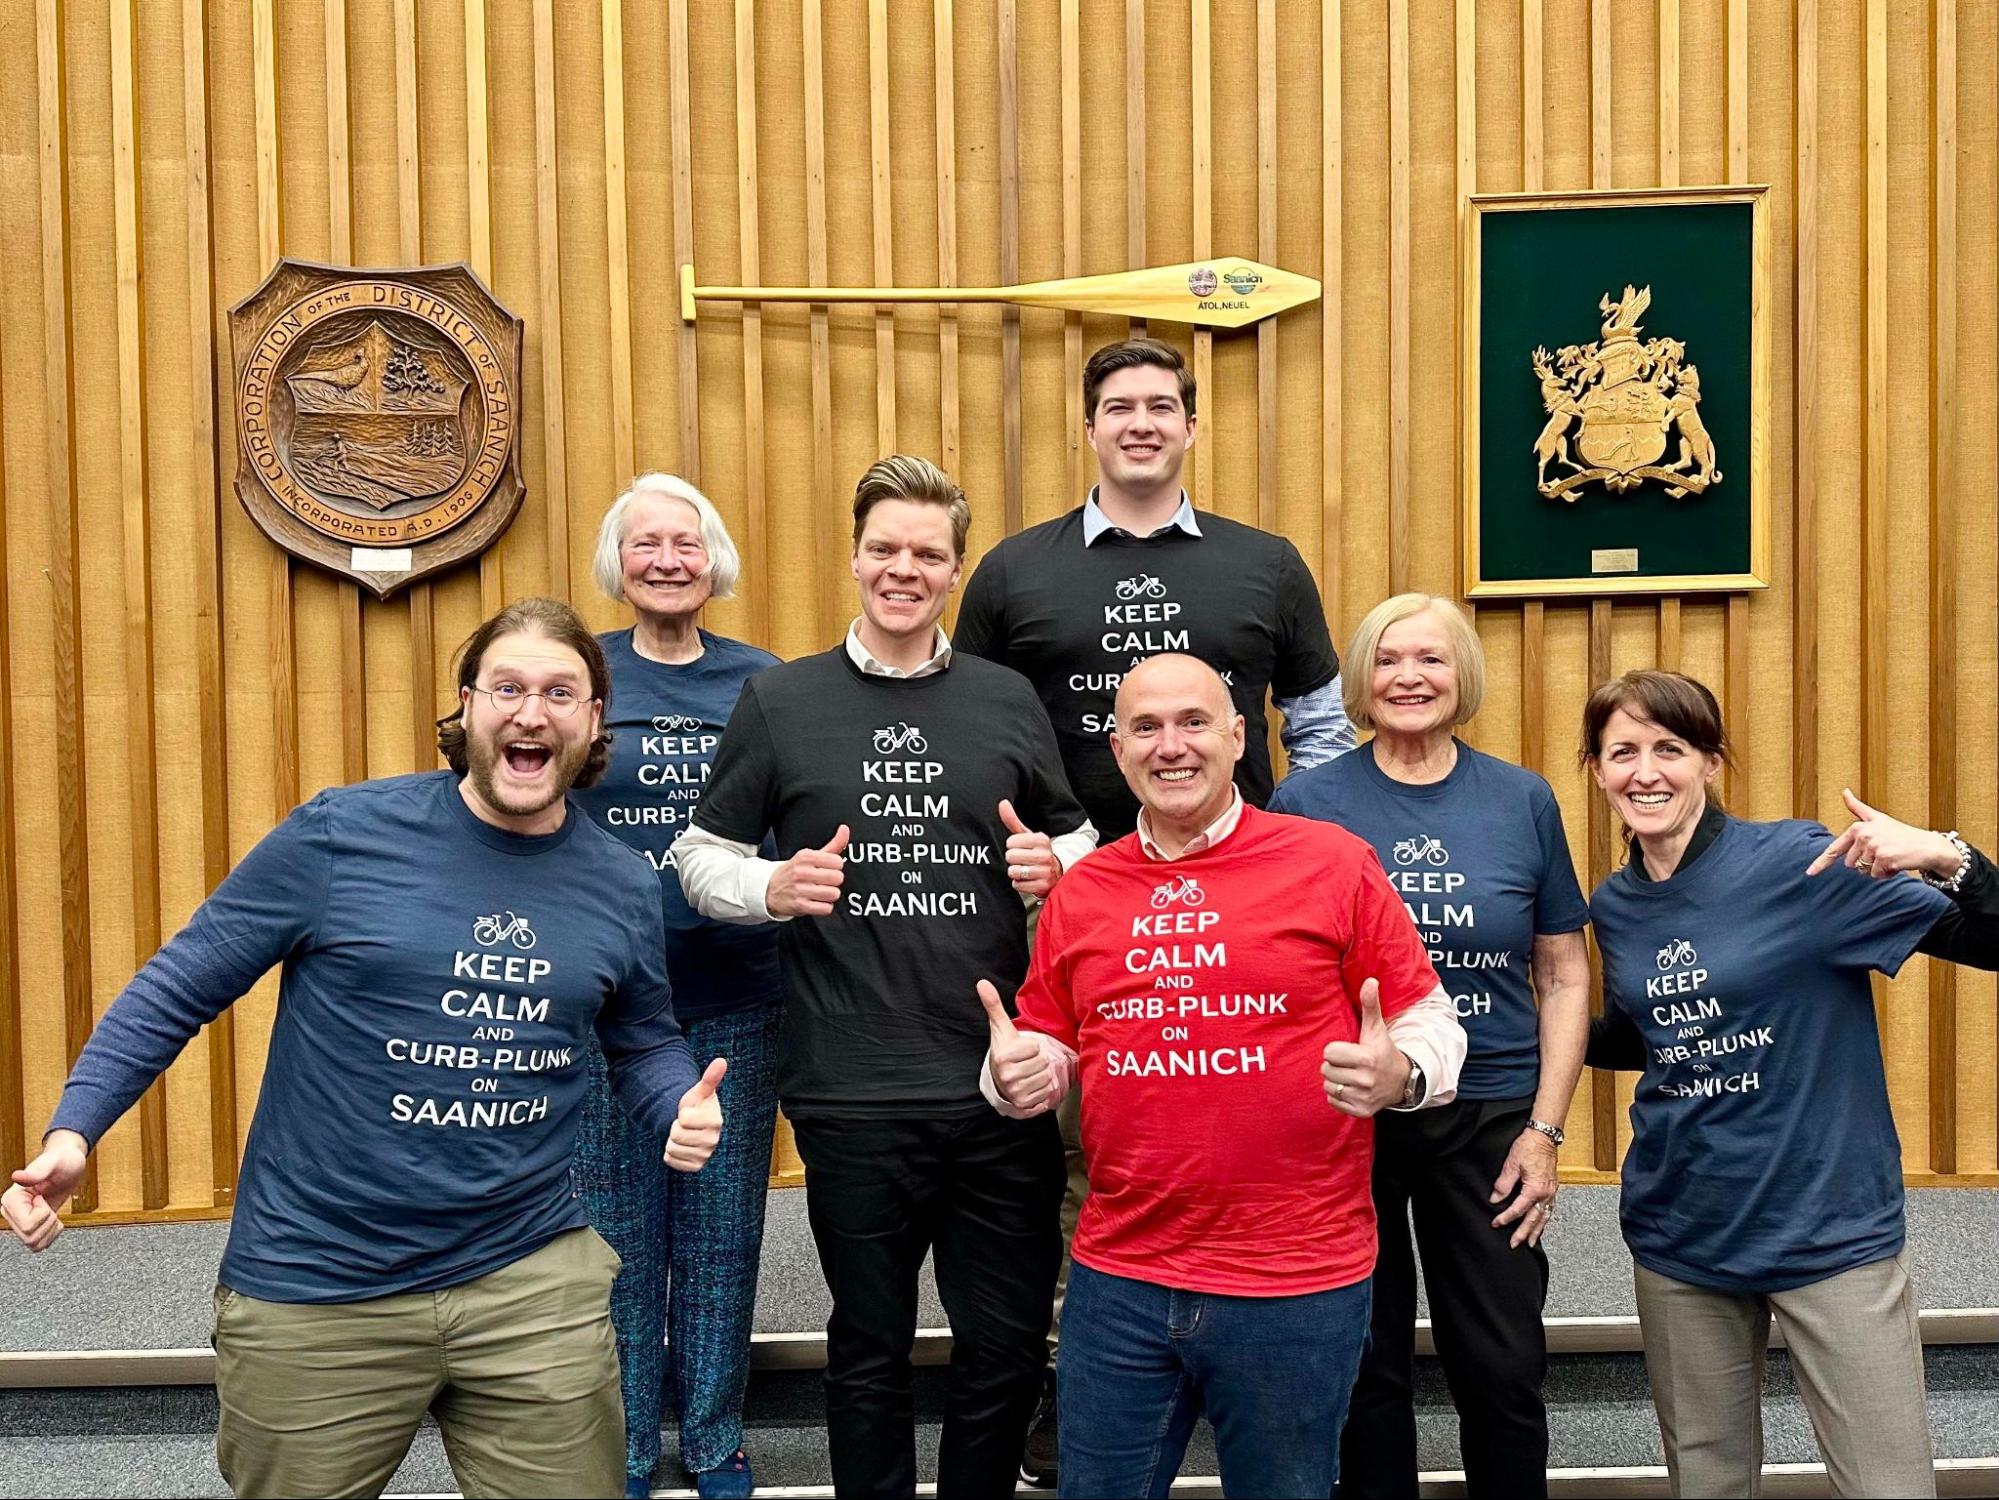 Dean stands in the middle of six other Council members (Teale, Karen, Zac, Colin, Susan, and Mena) smiling with shirts that read "Keep Calm and Curb-Plunk On Saanich"